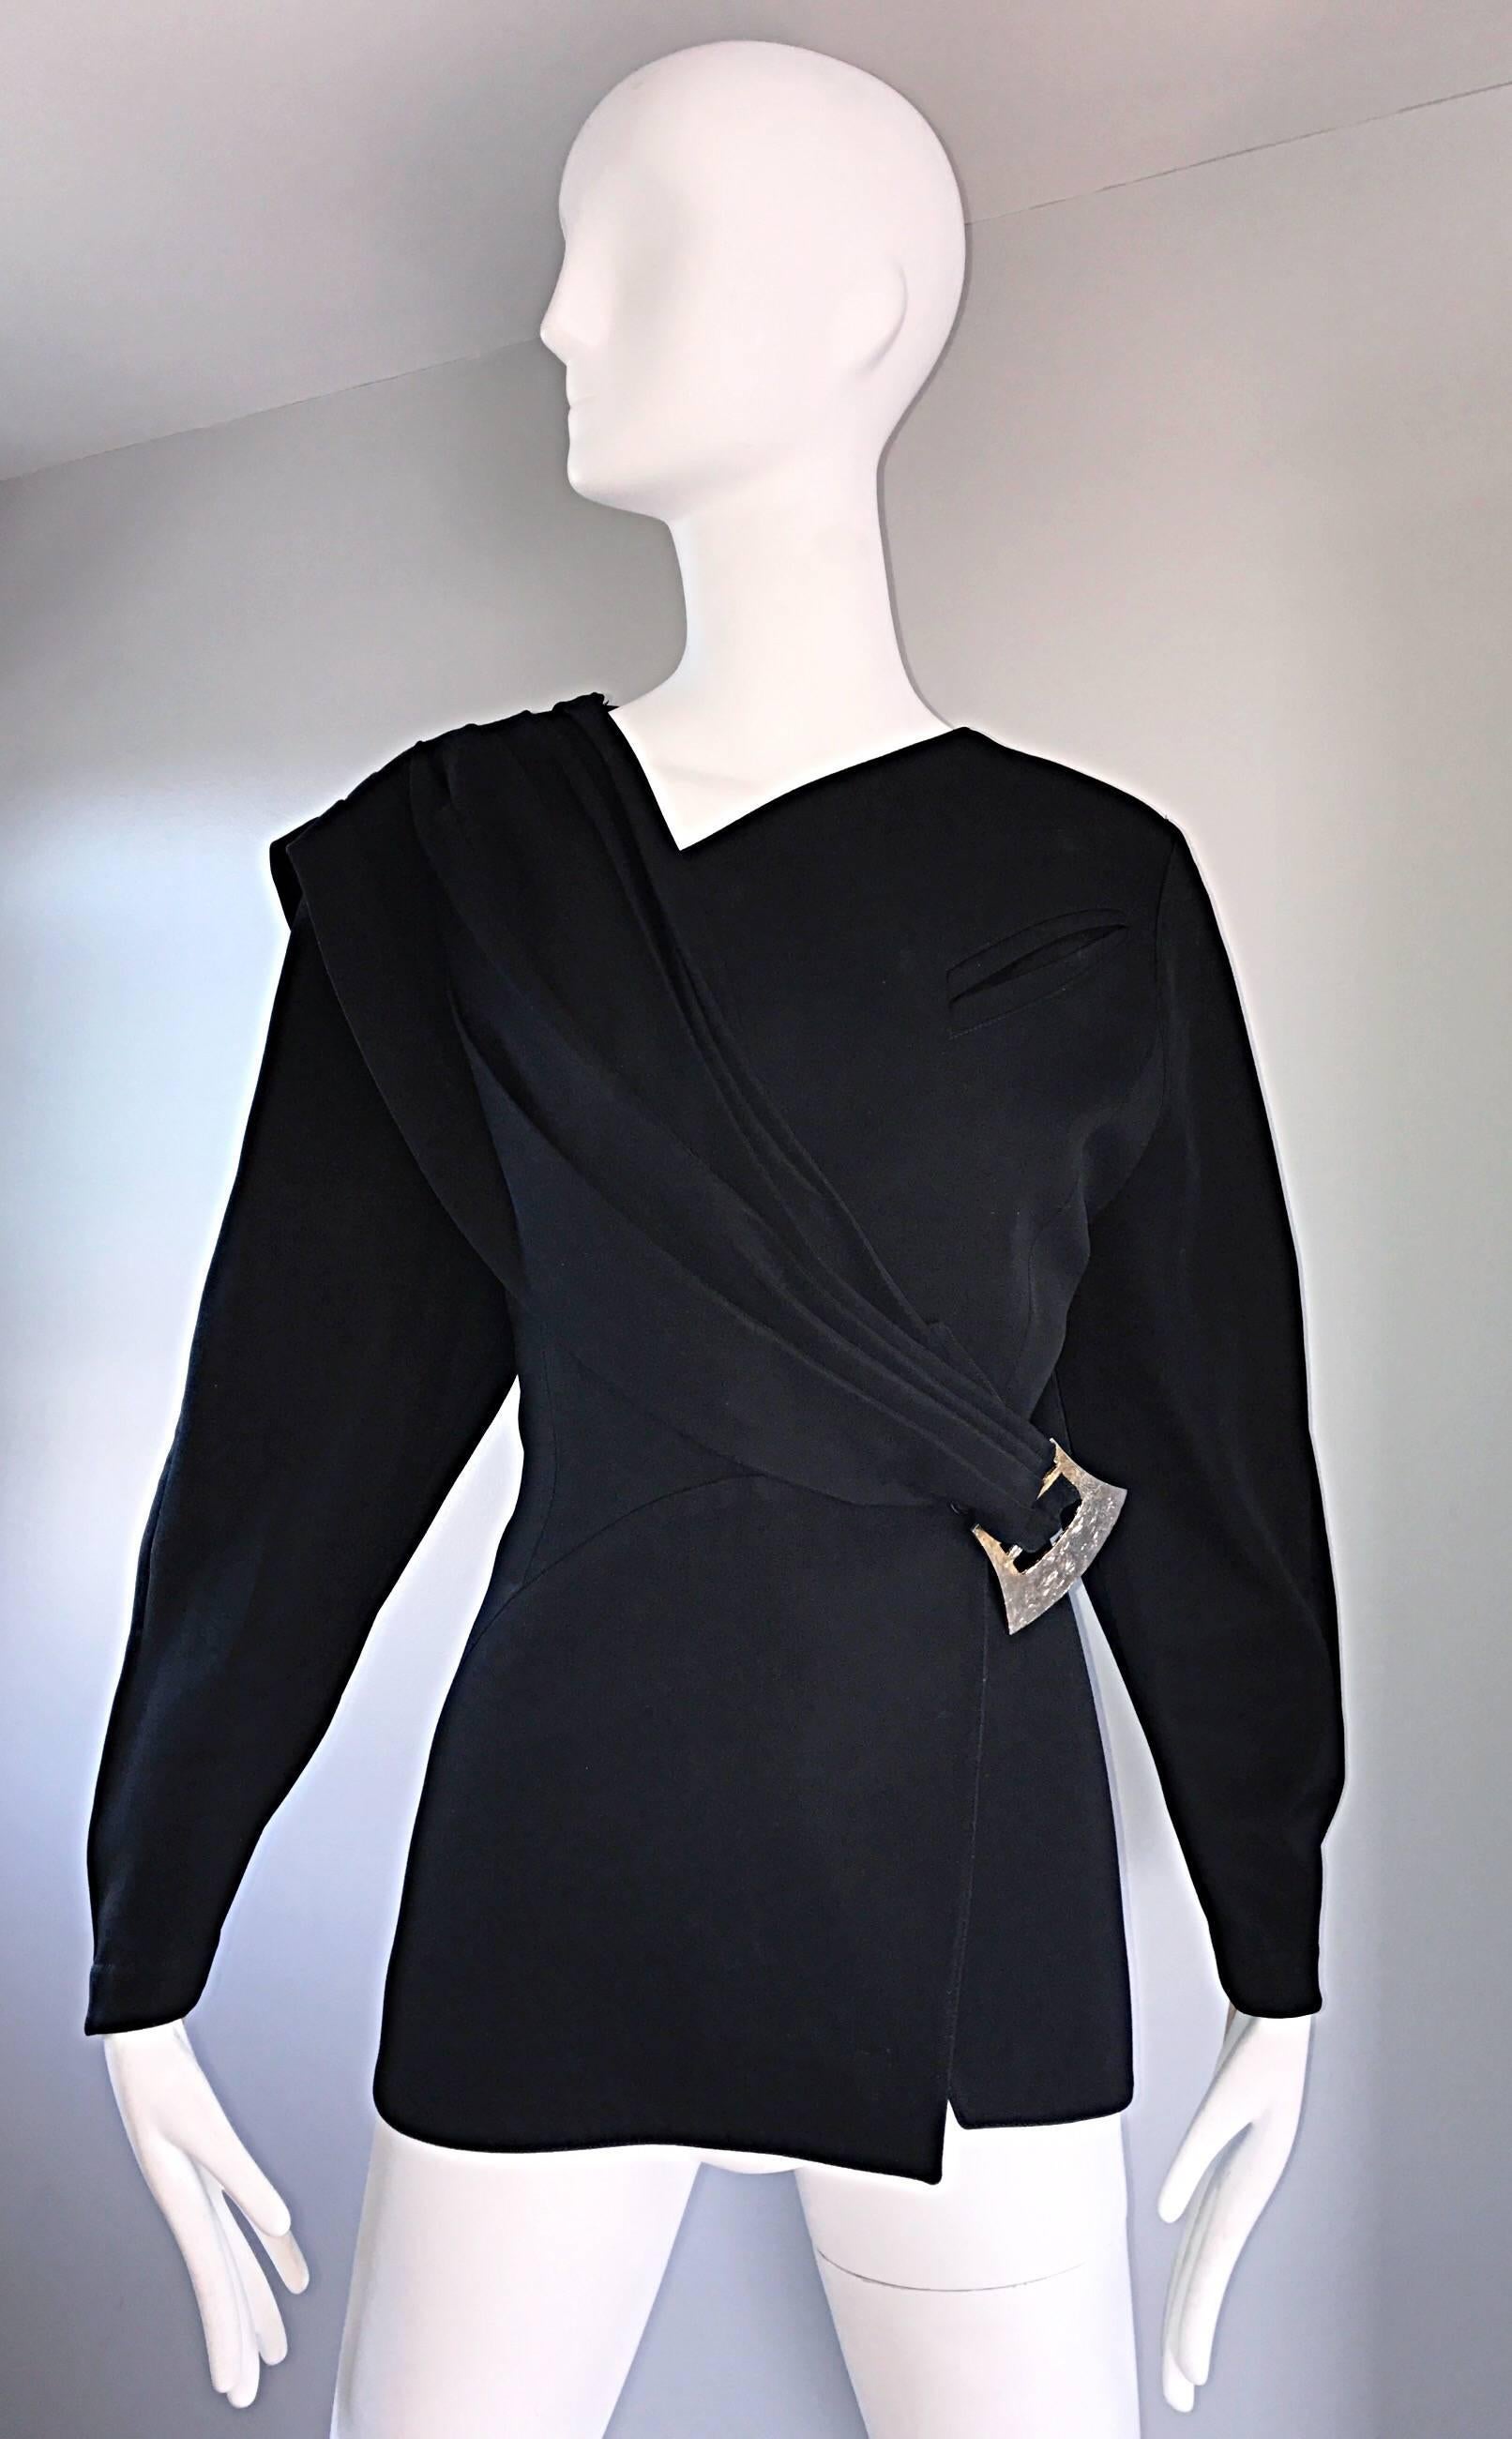 Iconic vintage 80s THIERRY MUGLER black Avant Garde blazer jacket! Features a pleated sash that crosses over the side front, with a hammered silver buckle closure at side waist. Incredible full sleeves, with signature raising at the outer seams, and